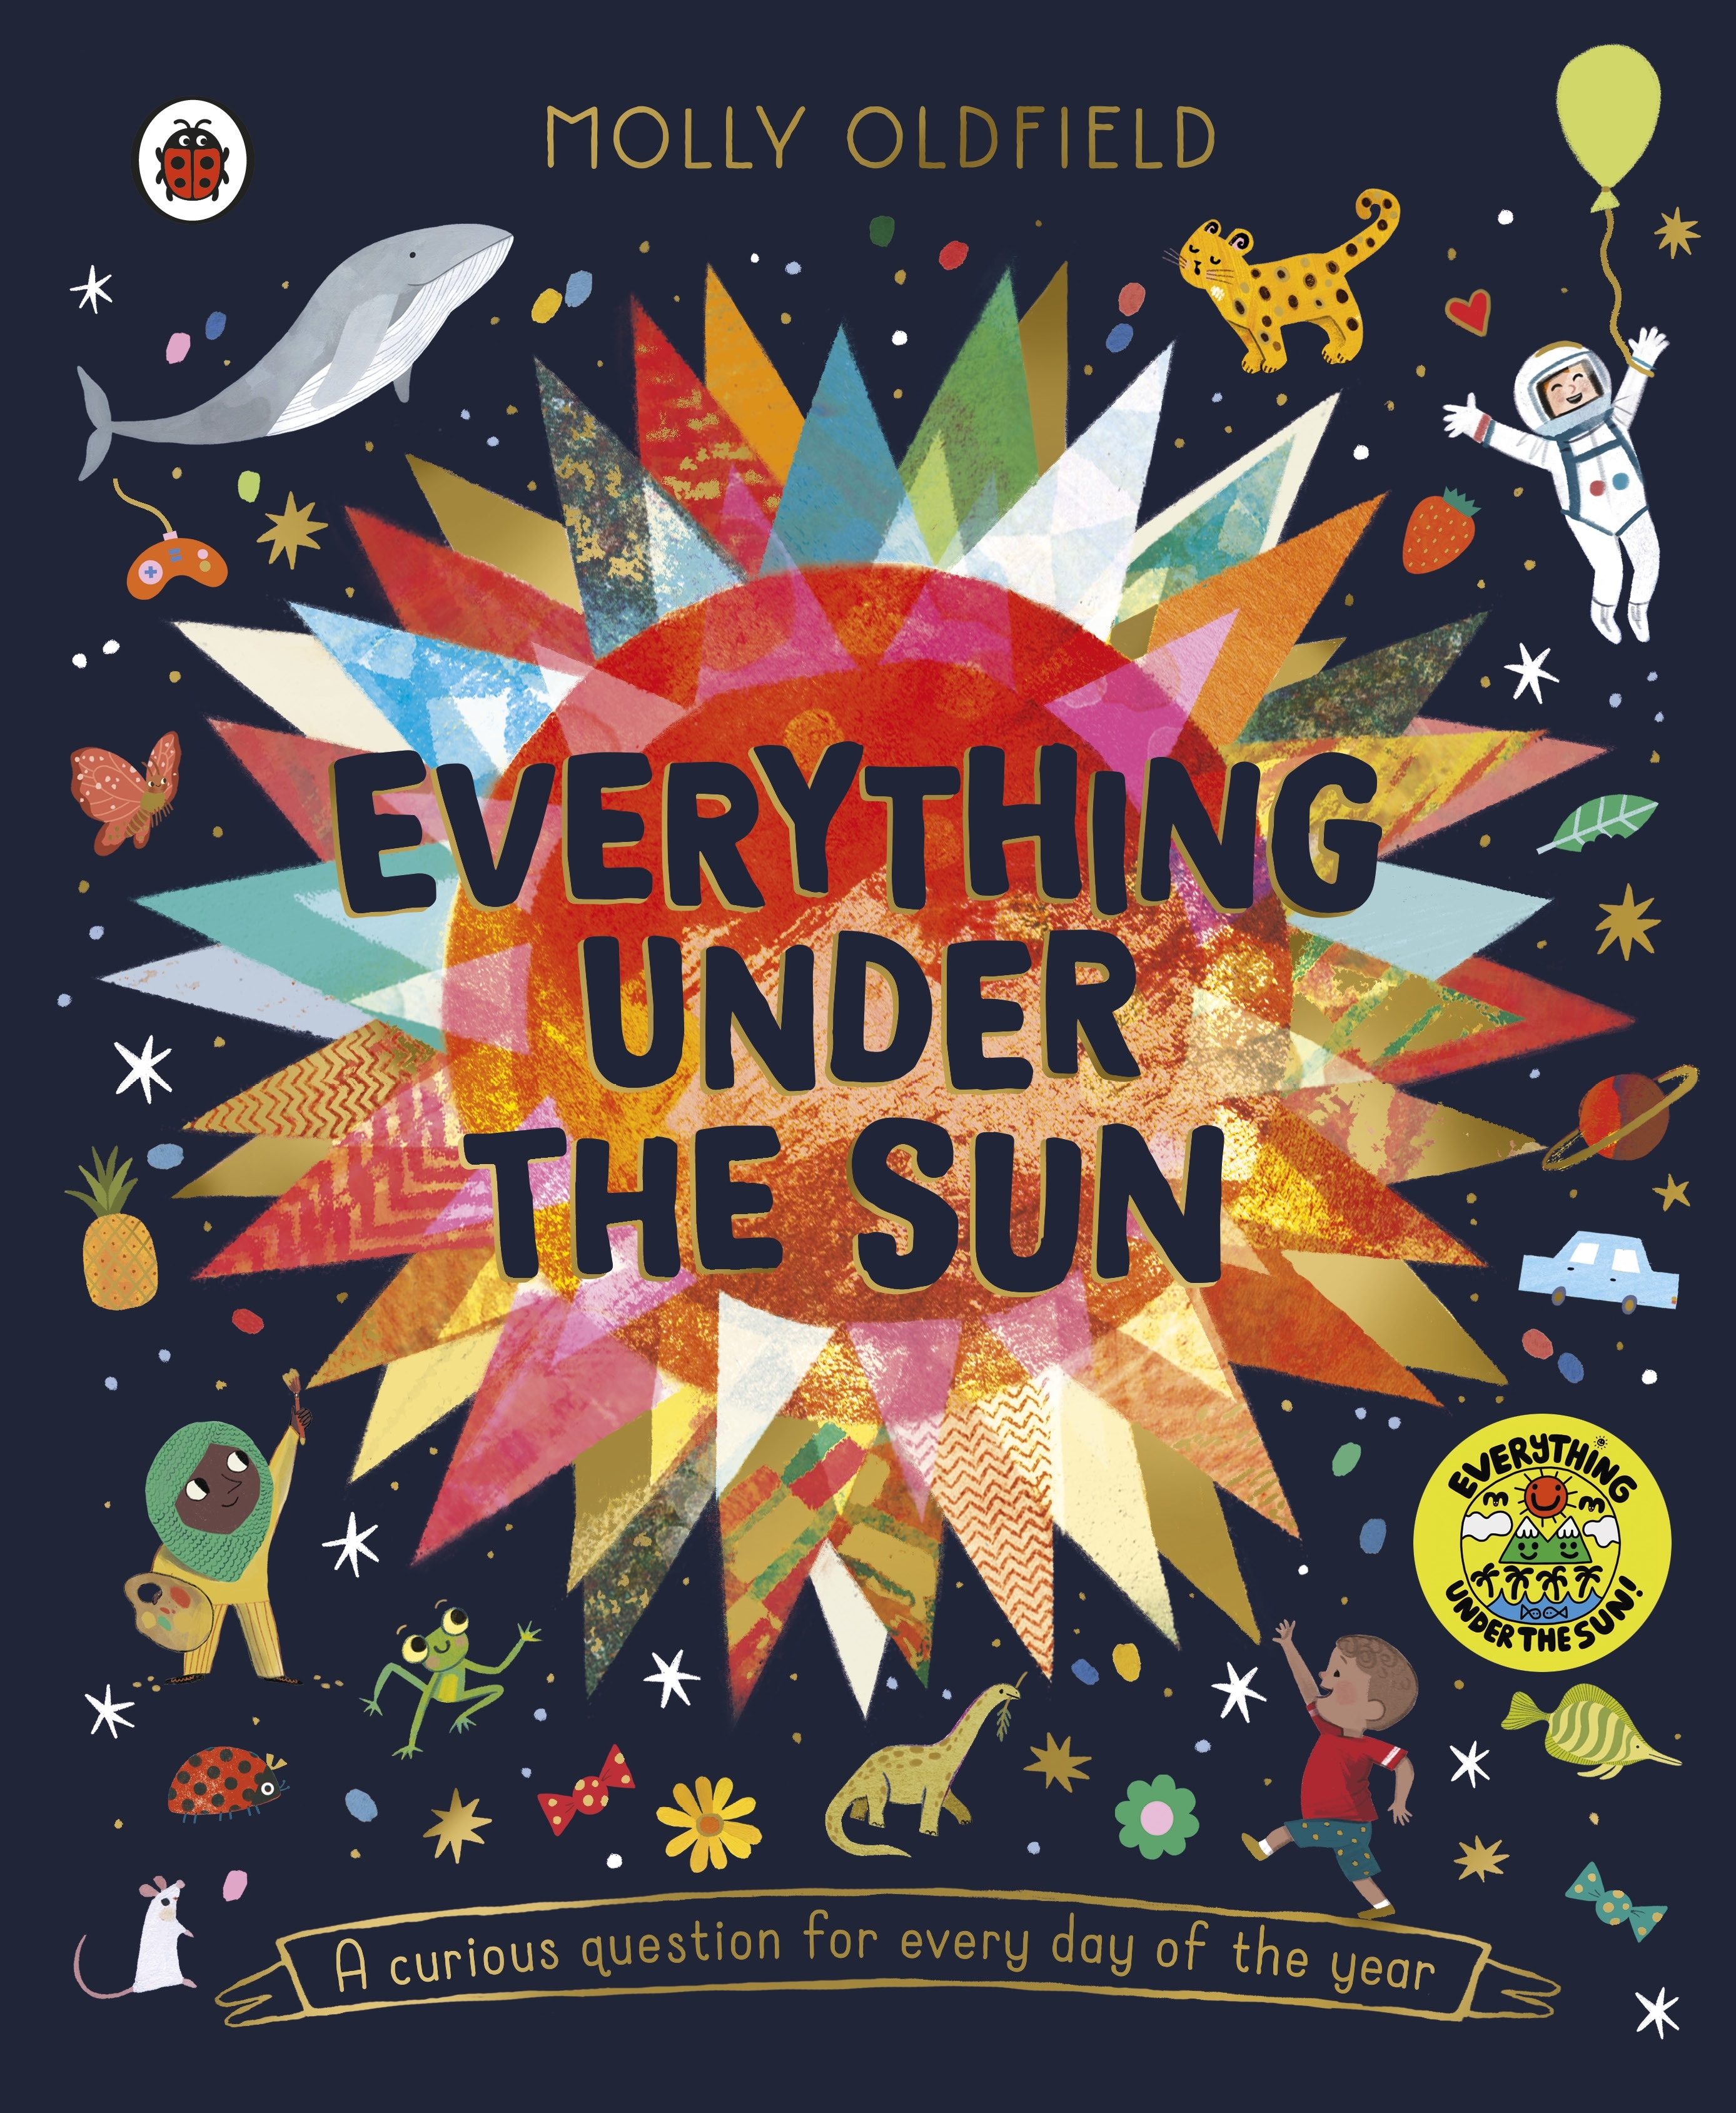 Book “Everything Under the Sun” by Molly Oldfield — September 9, 2021